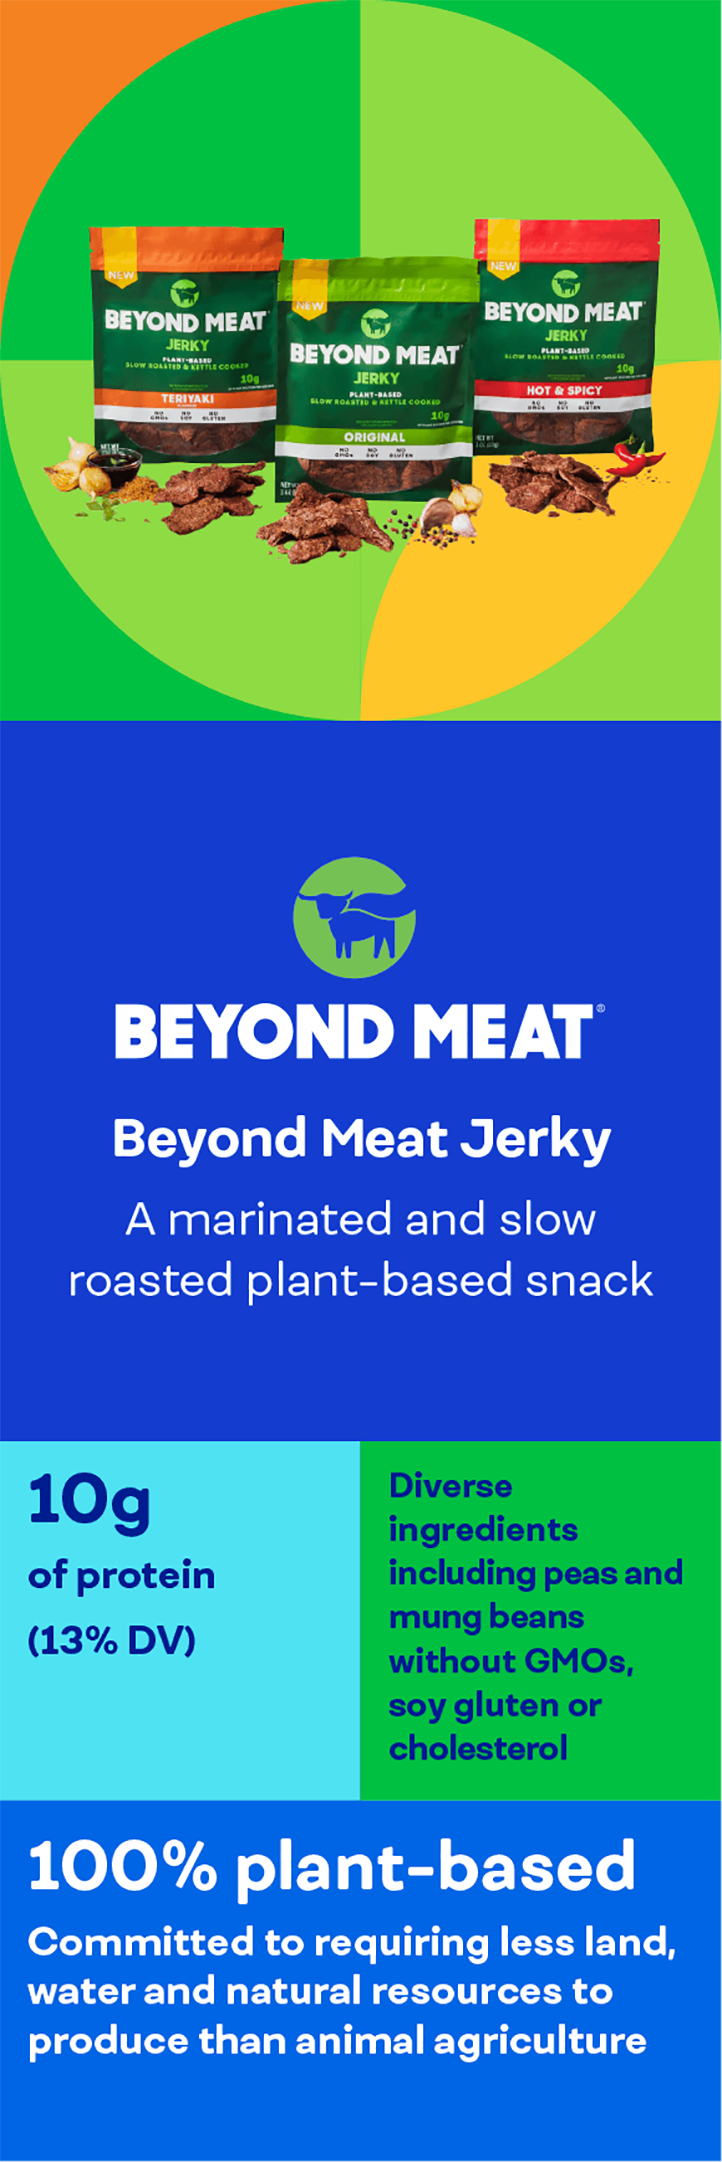 Beyond Meat Jerky. 10g of protein, diverse ingredients, 100% plant-based.